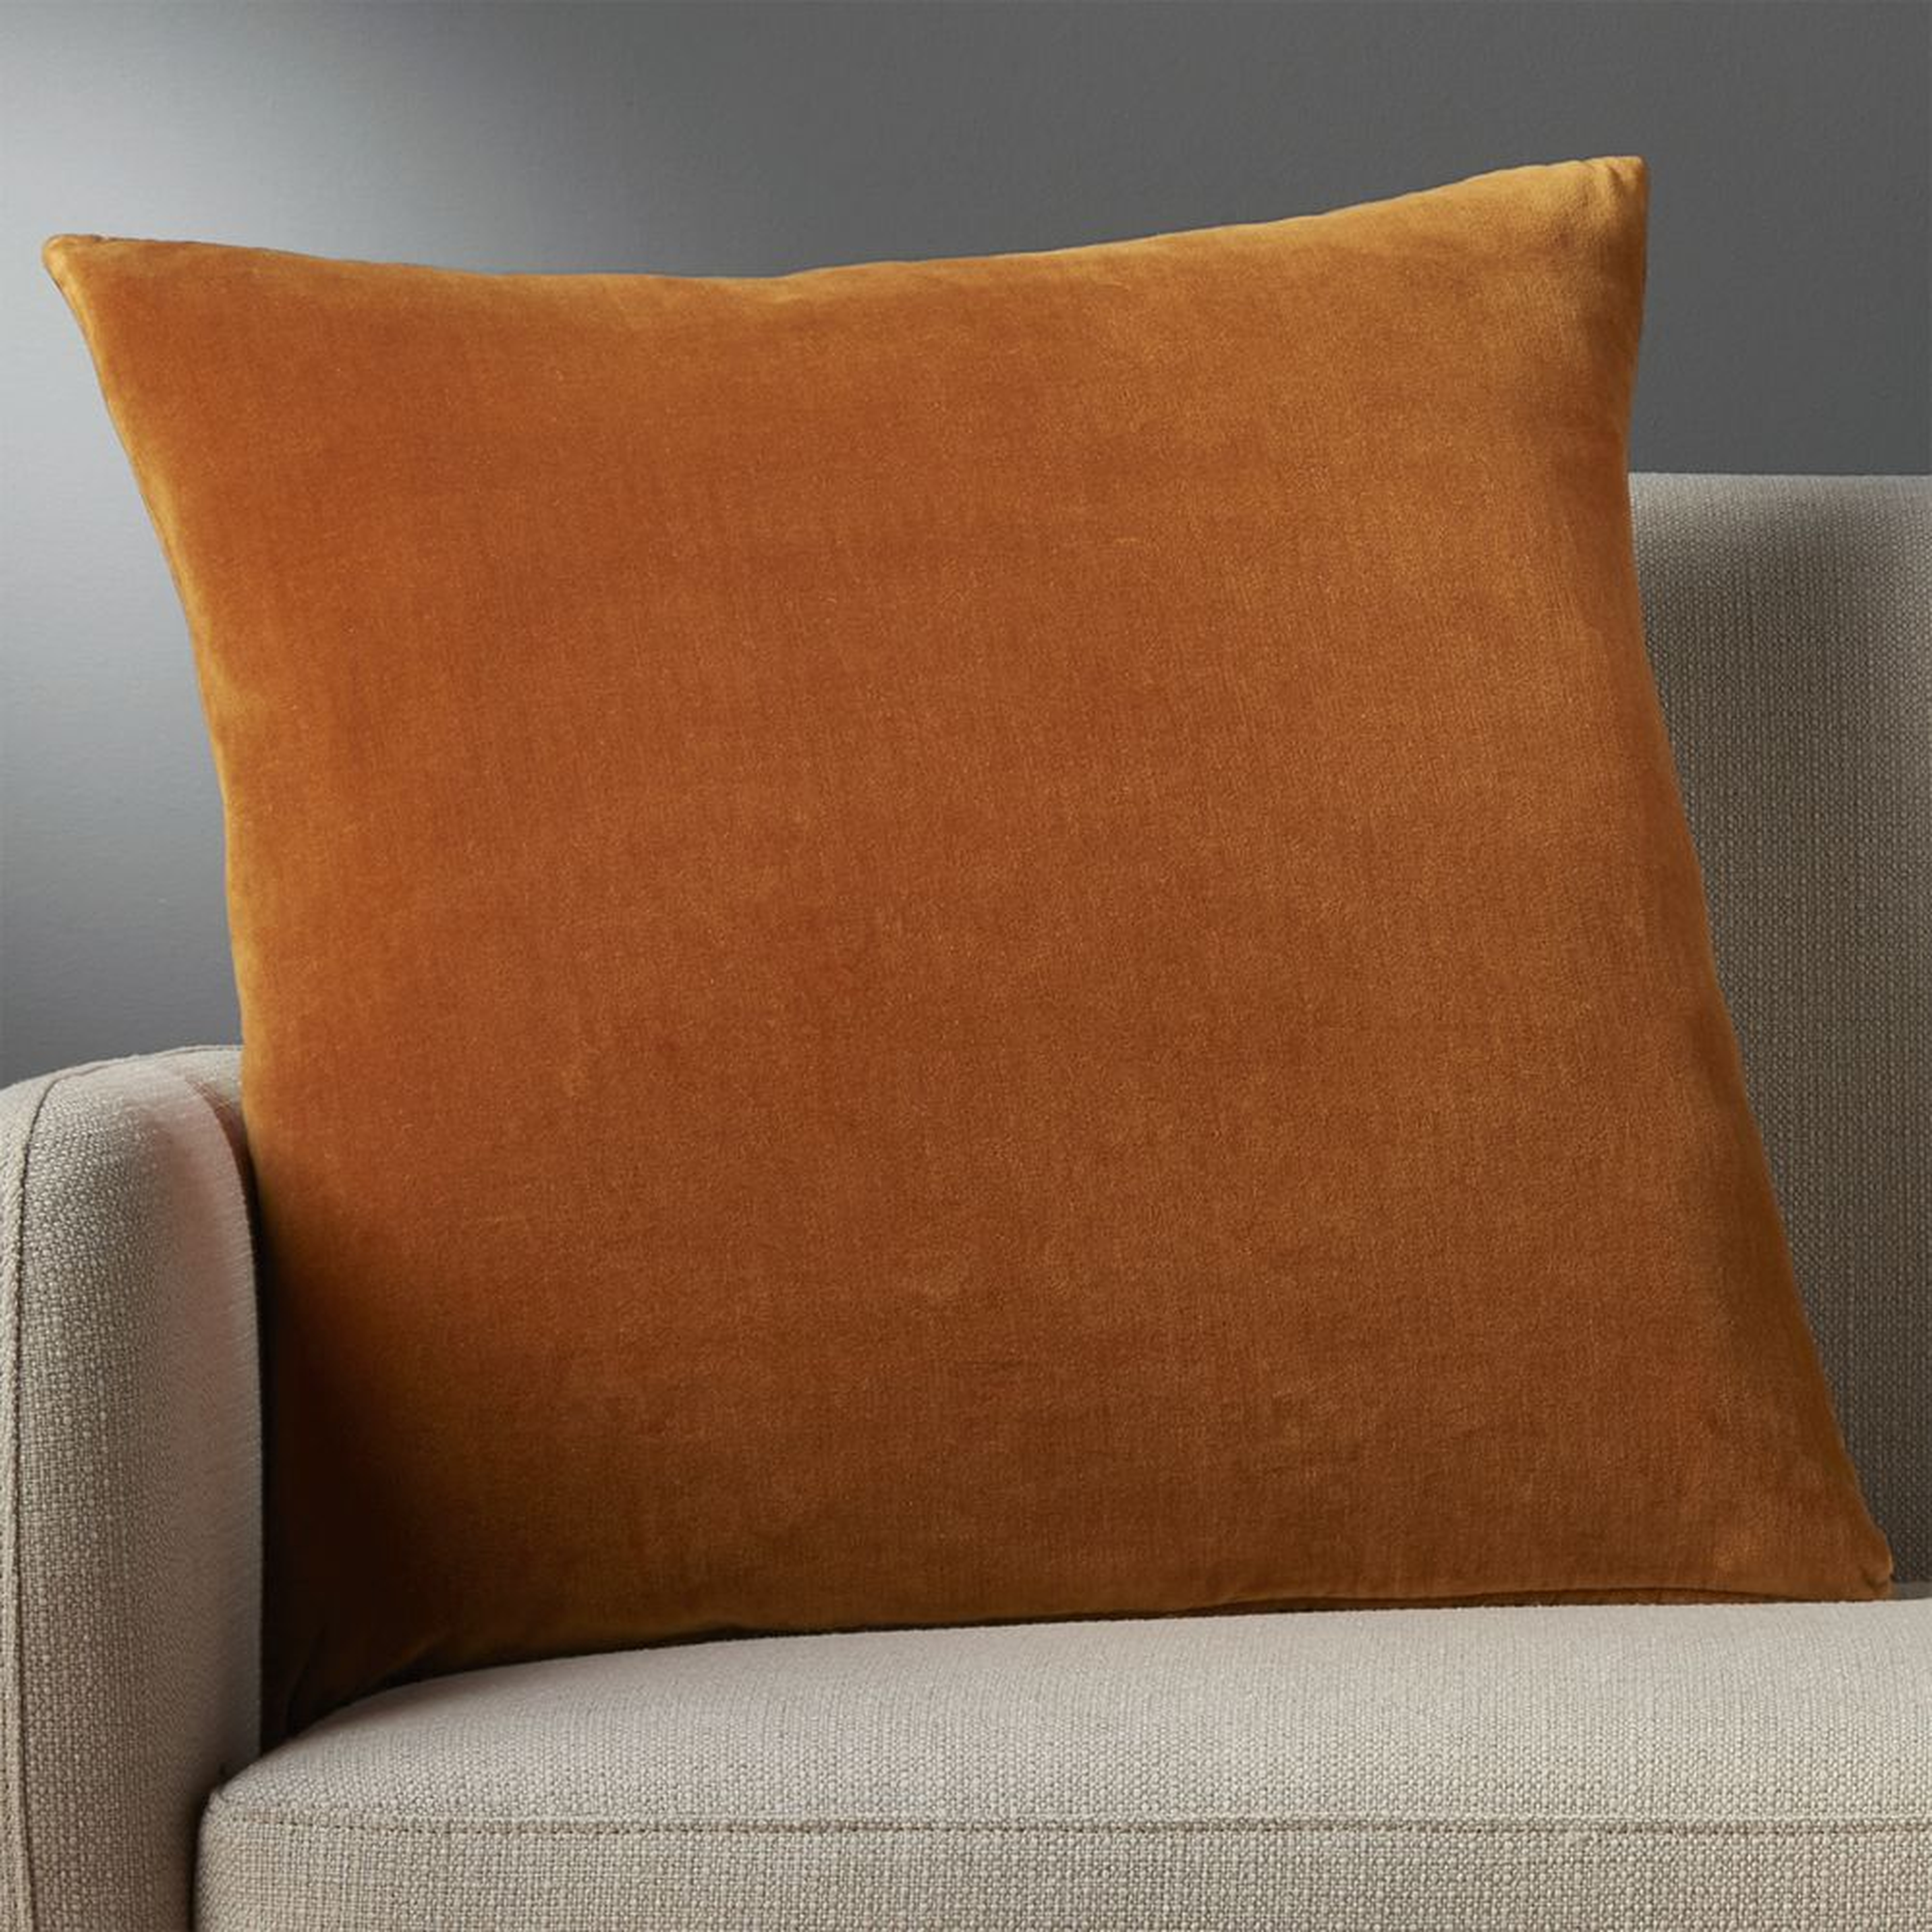 "23"" leisure copper pillow with feather-down insert" - CB2